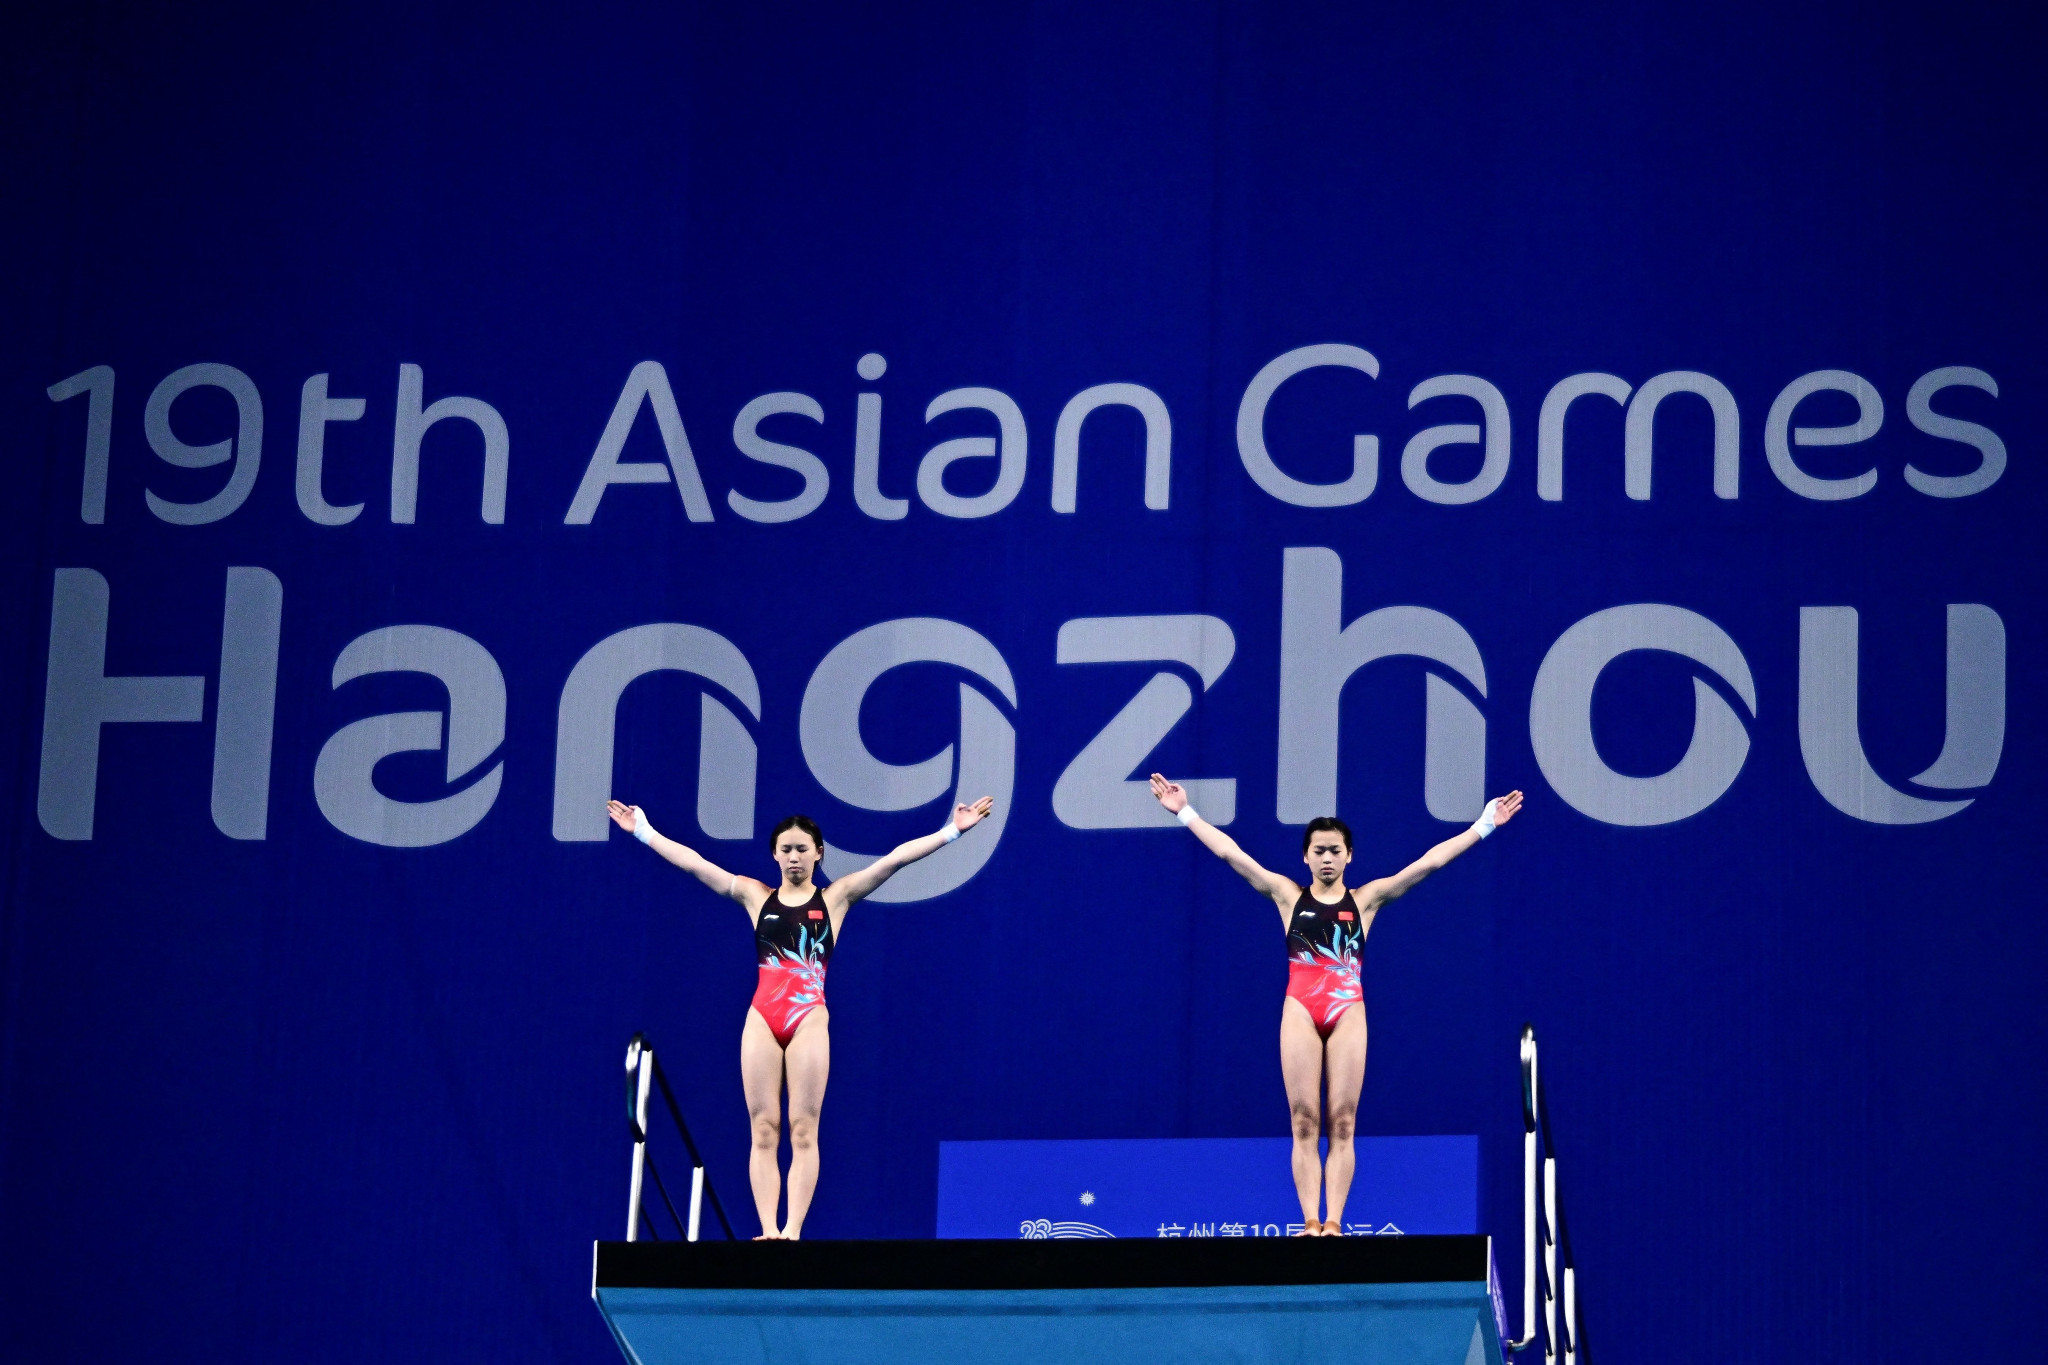 insidethegames is reporting LIVE from the Hangzhou 2022 Asian Games